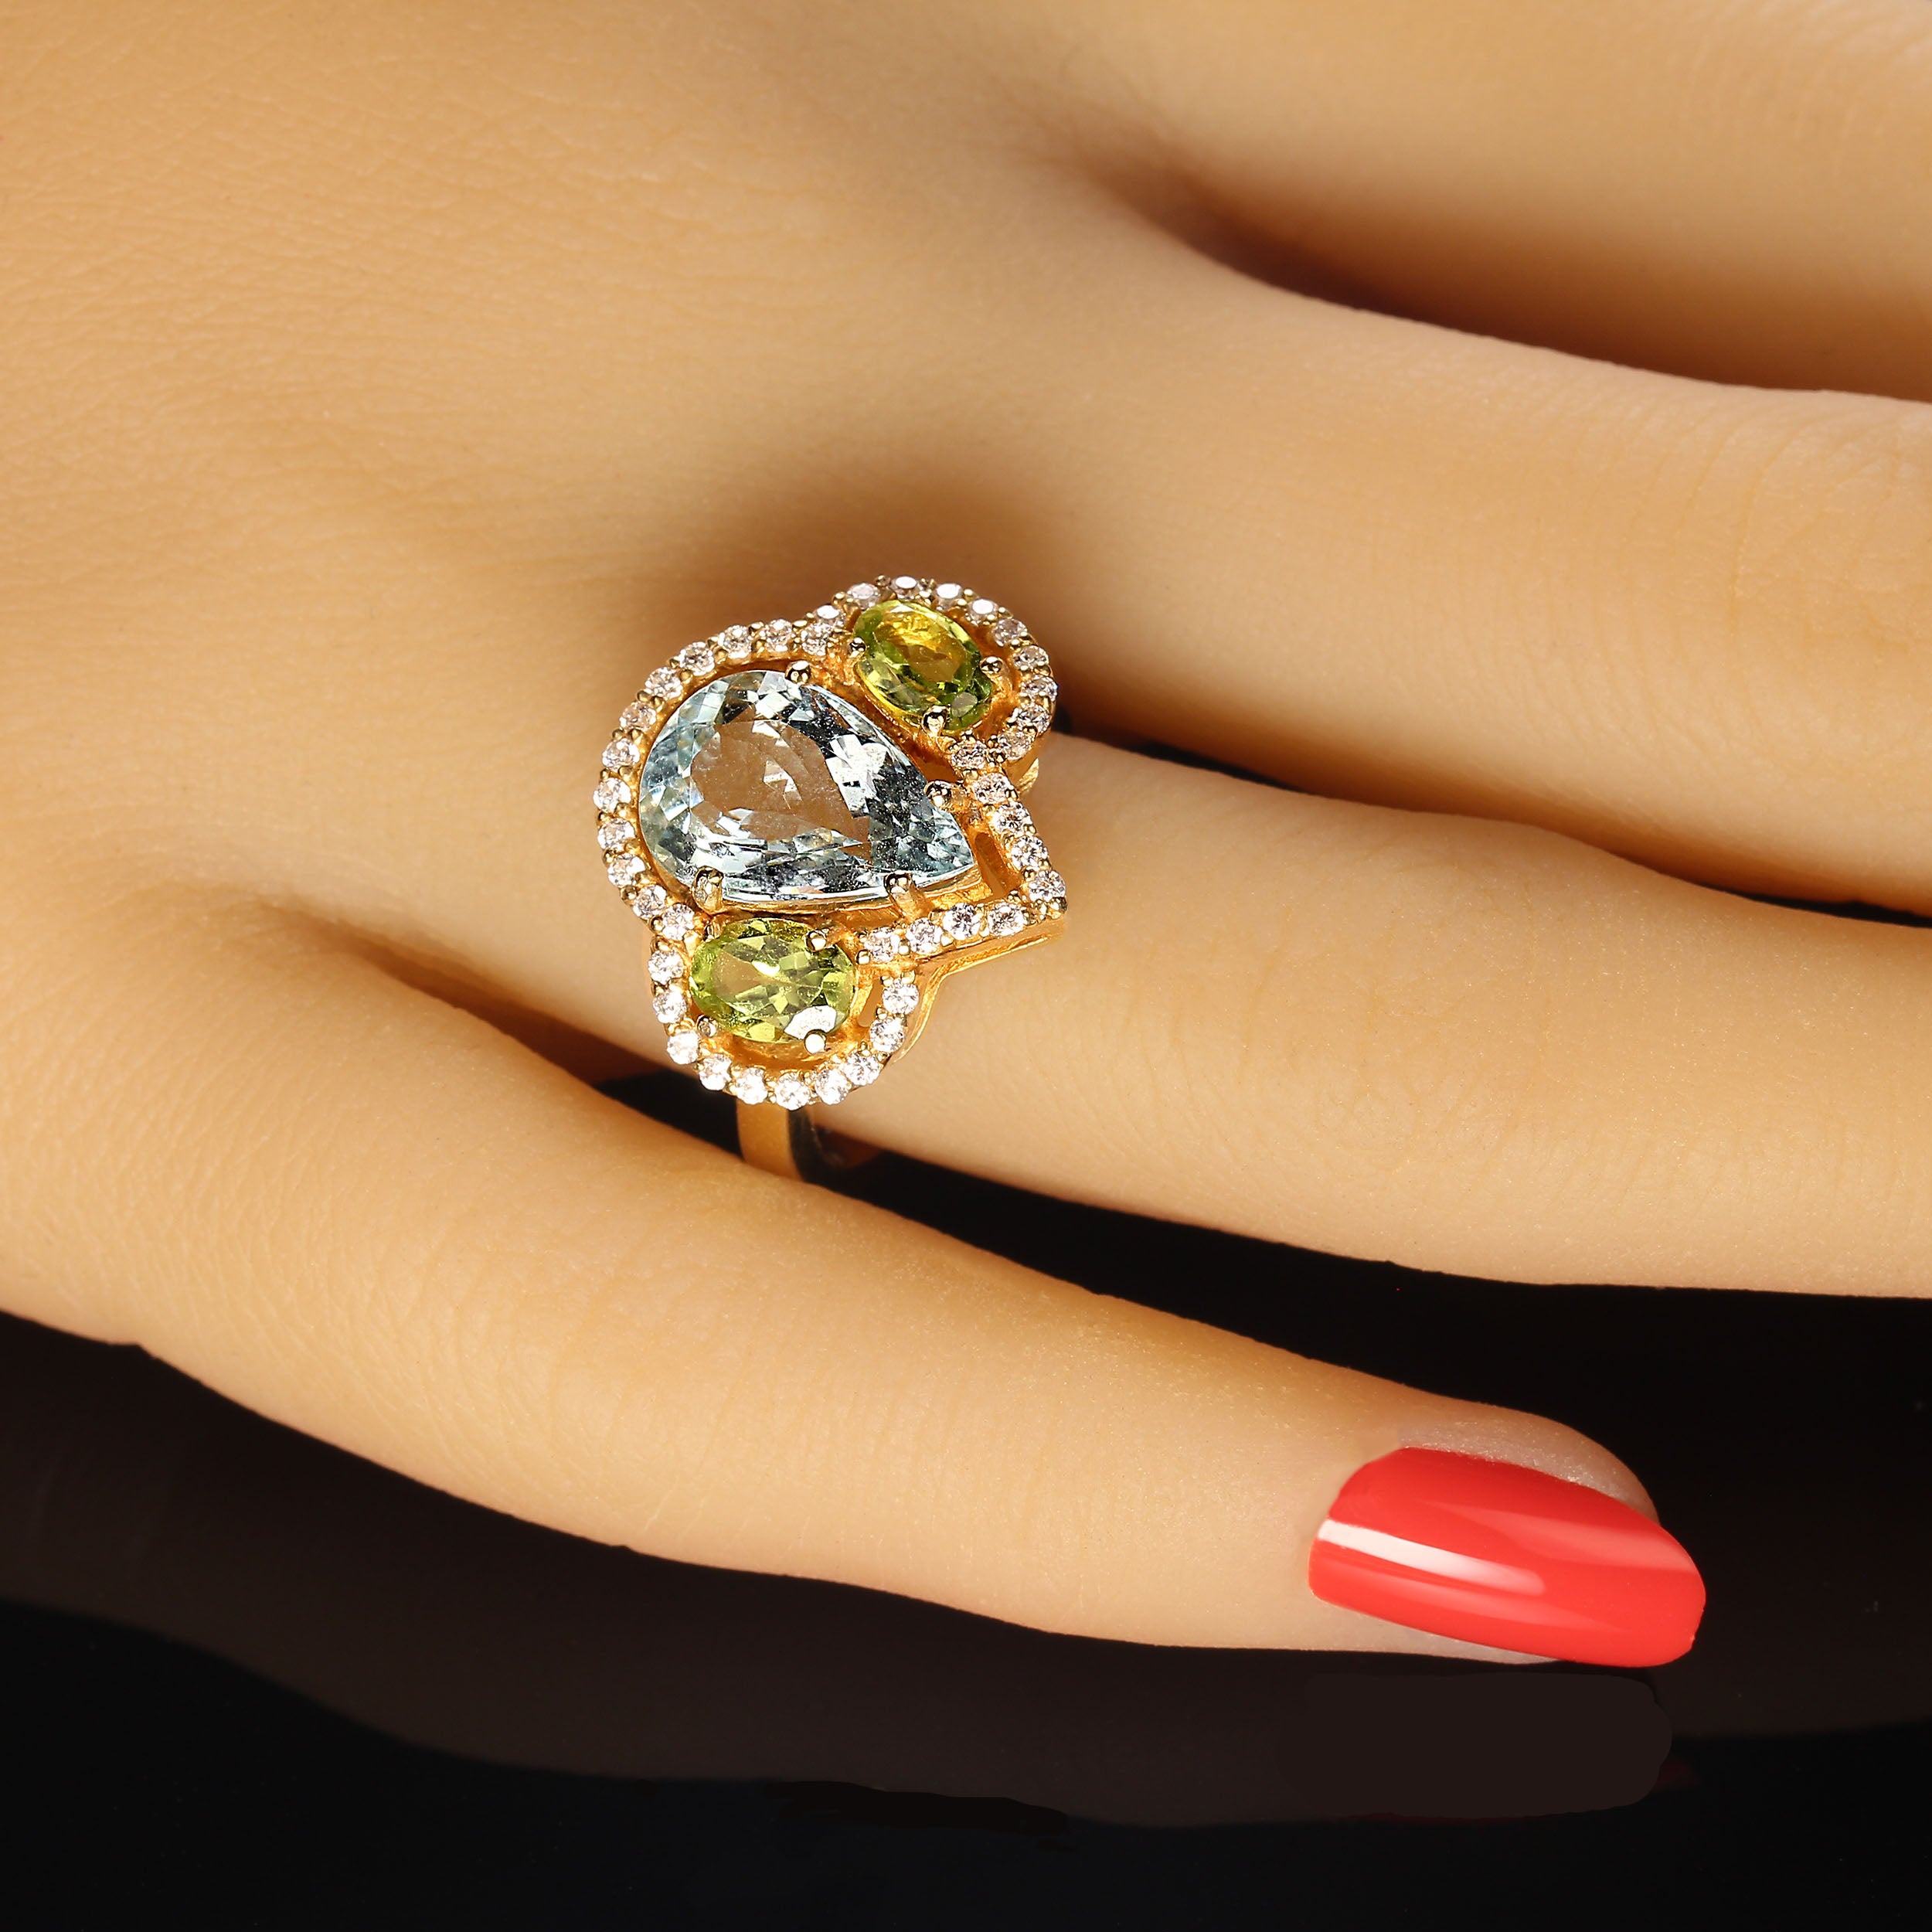 AJD Ring of Aquamarine, Peridot, and genuine Zircon March Birthstone For Sale